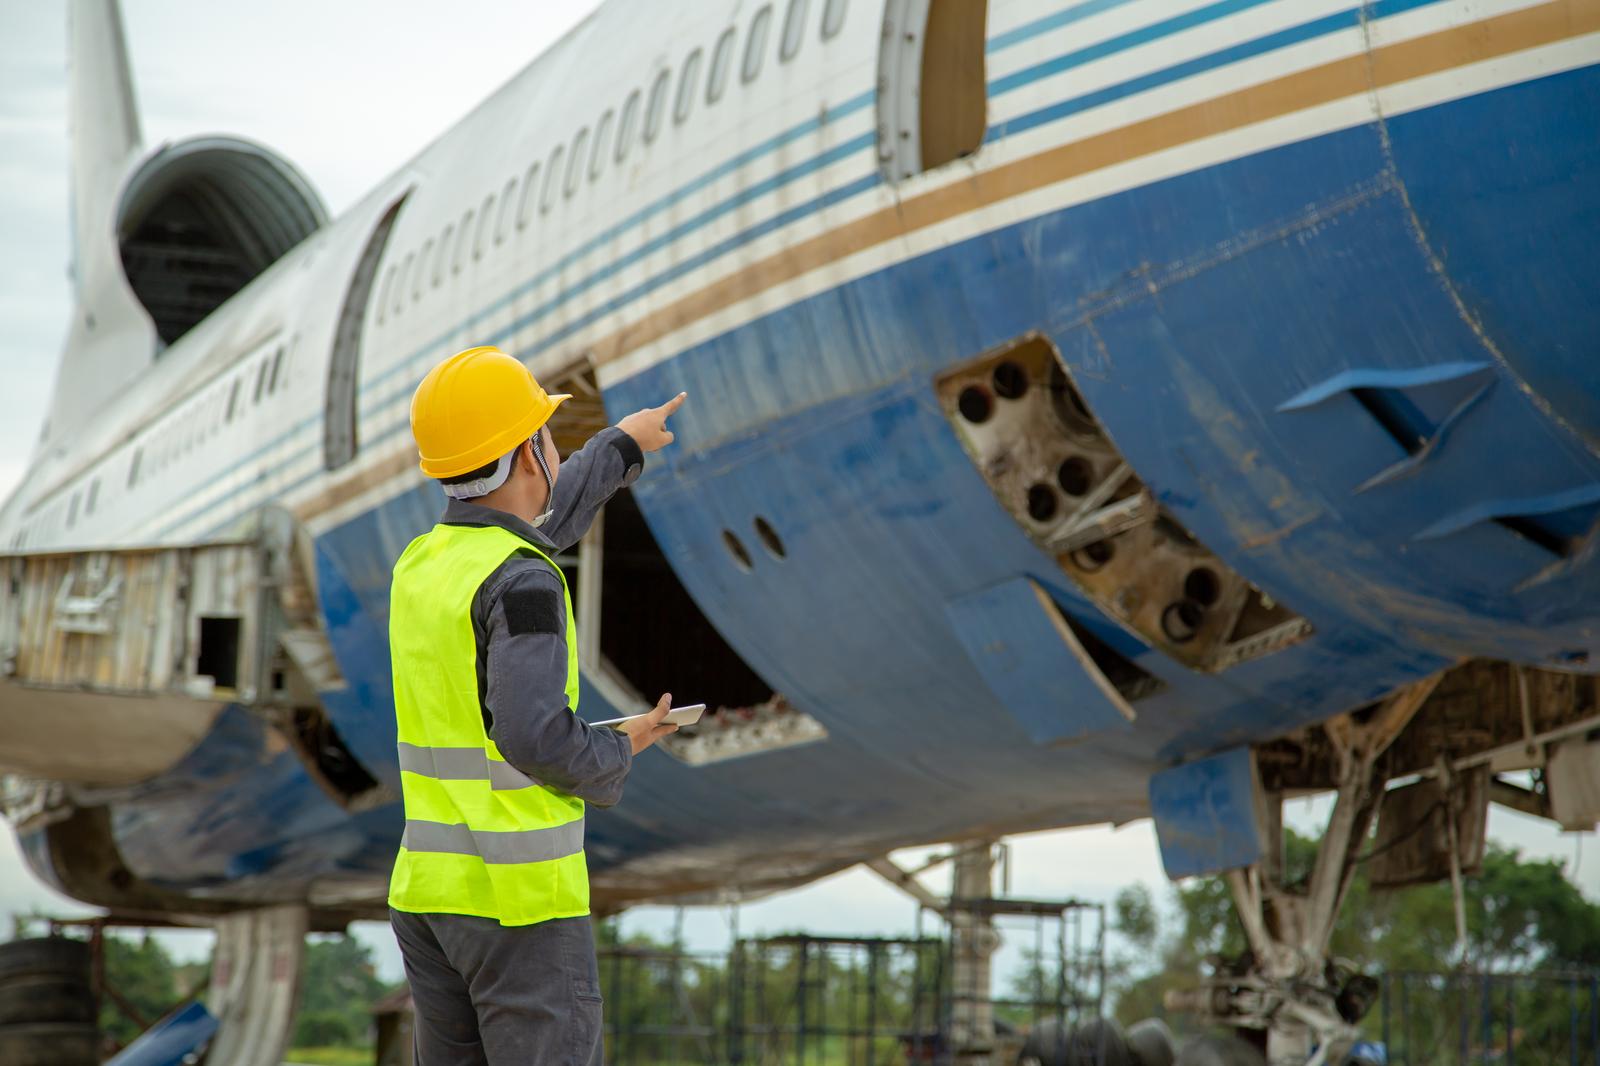 Repair and maintenance of aircraft and spacecraft in Tallinn